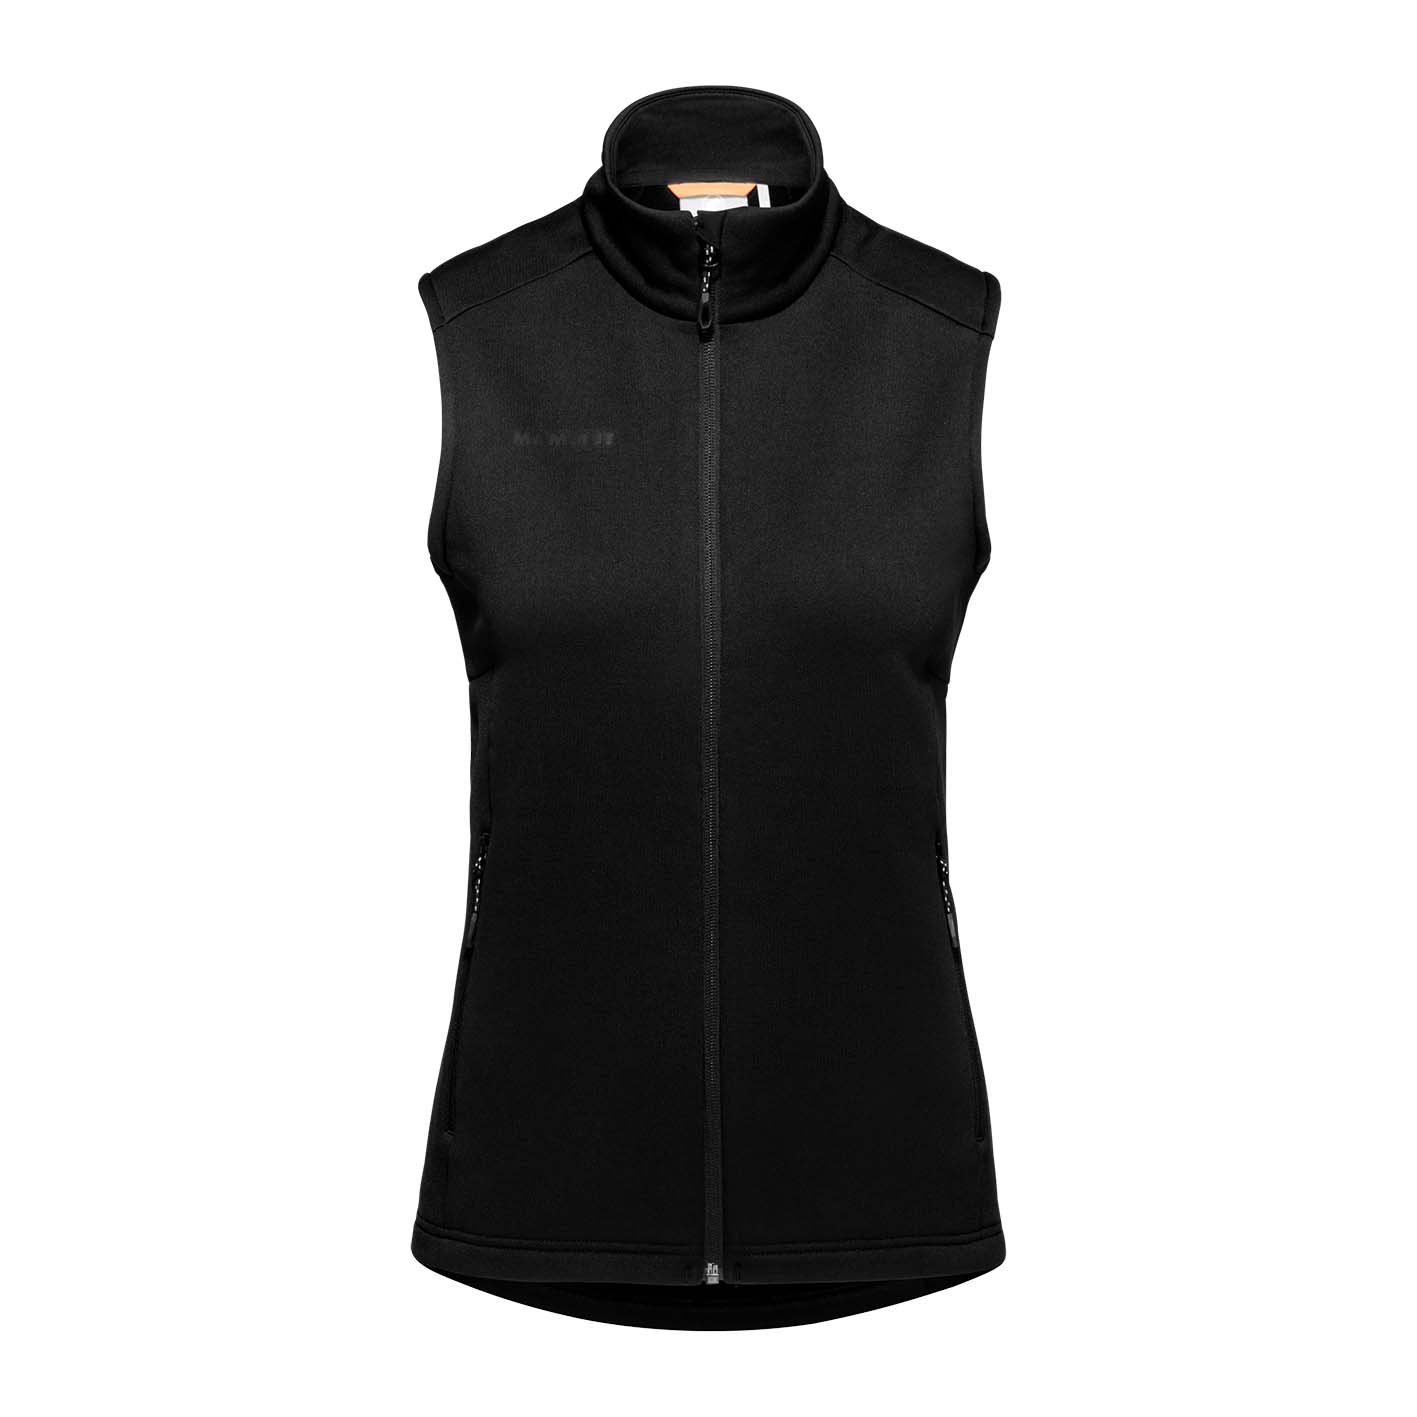 Mammut Mid Layer Vest | Branded Clothing | Project Merchandise